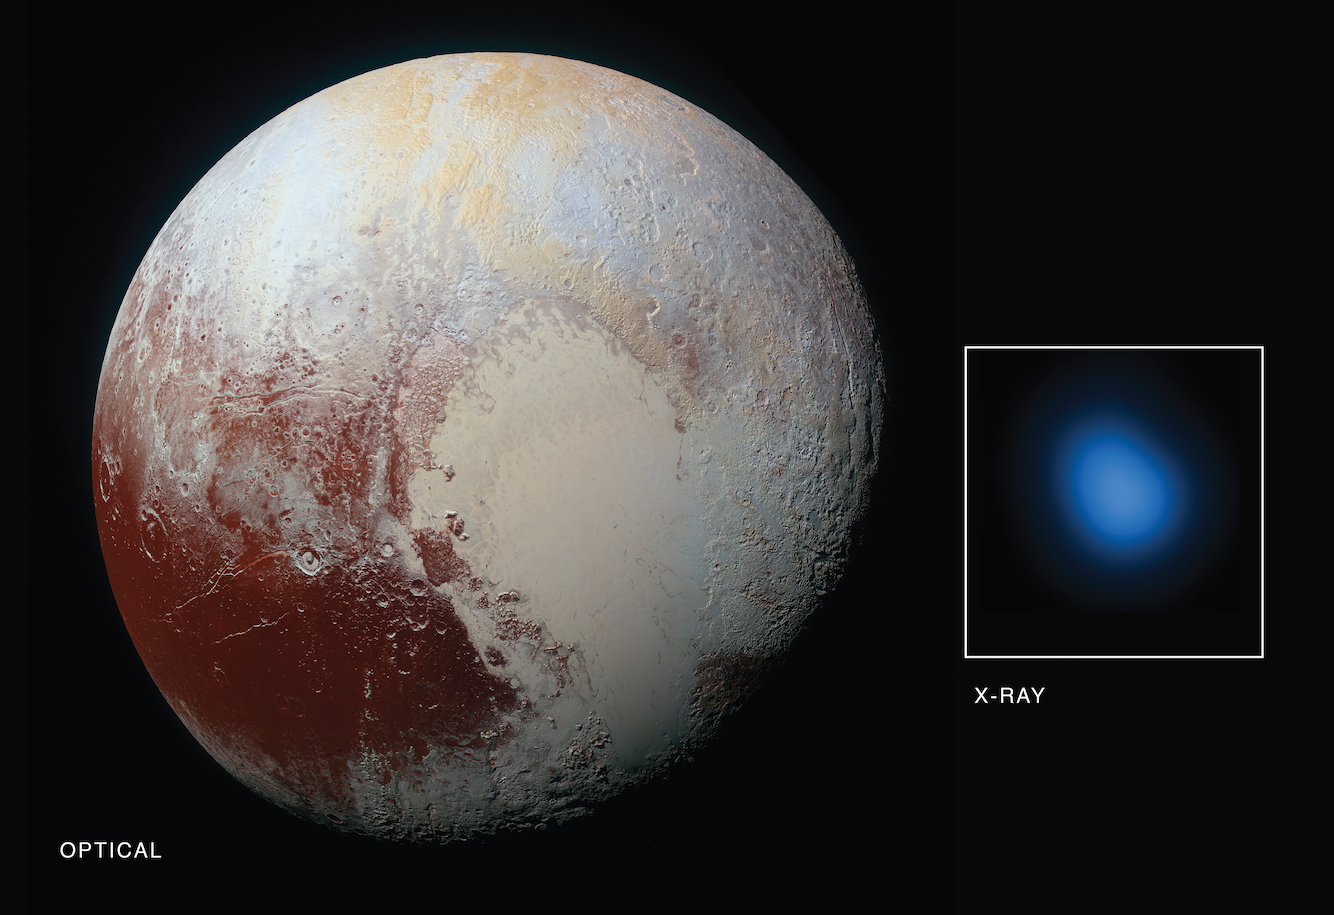 For the first time, x-rays have been detected around Pluto, as seen by Chandra (inset image). Image Credit: NASA/Johns Hopkins University Applied Physics Laboratory/Southwest Research Institute/Chandra X-Ray Center